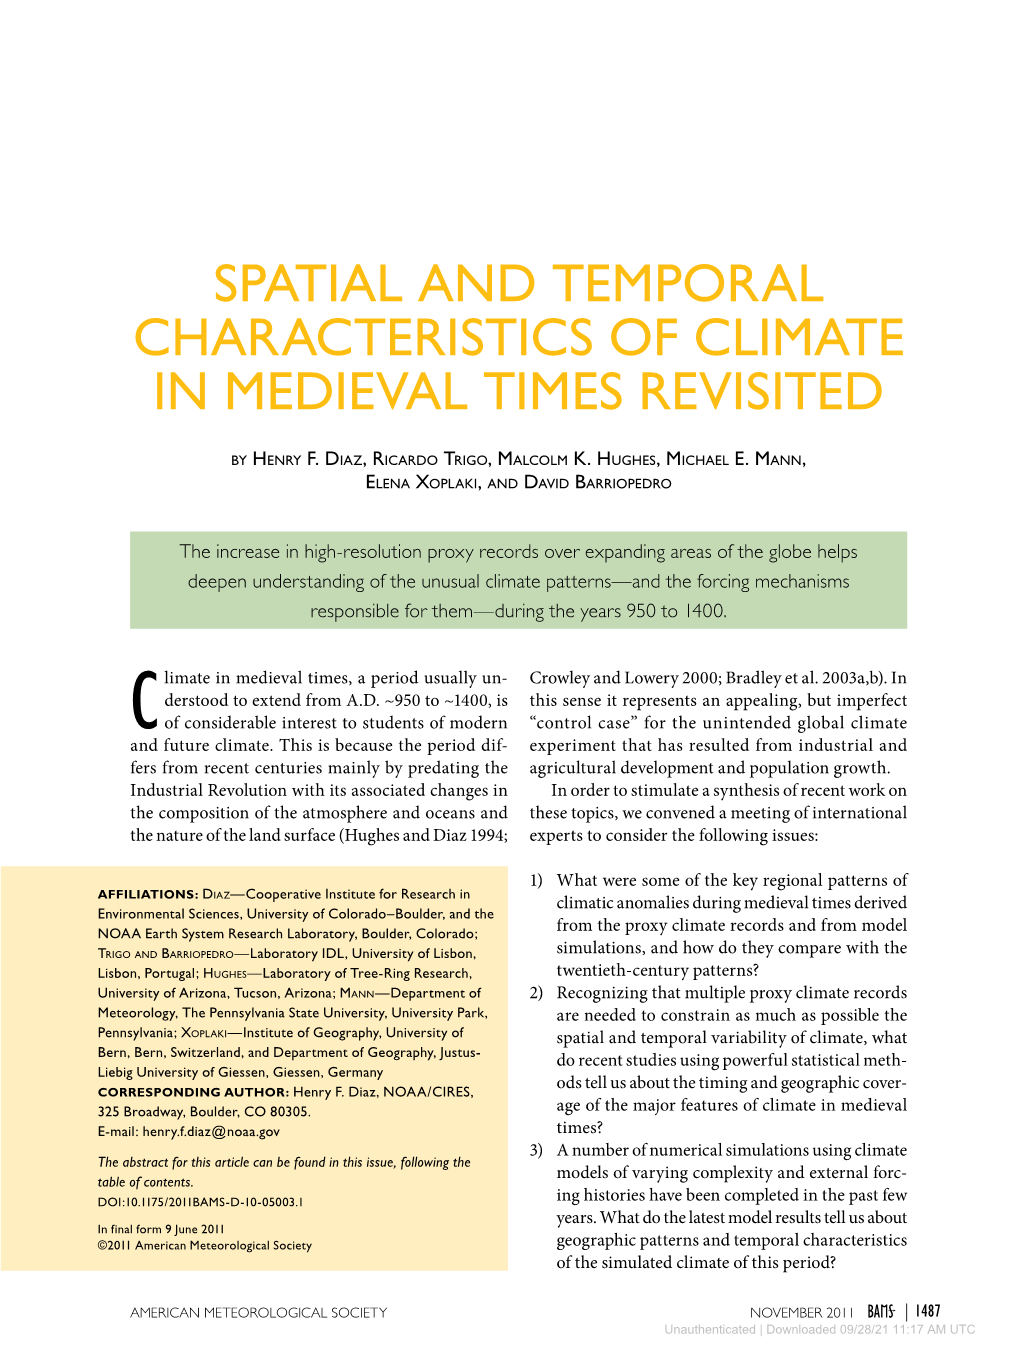 Spatial and Temporal Characteristics of Climate in Medieval Times Revisited